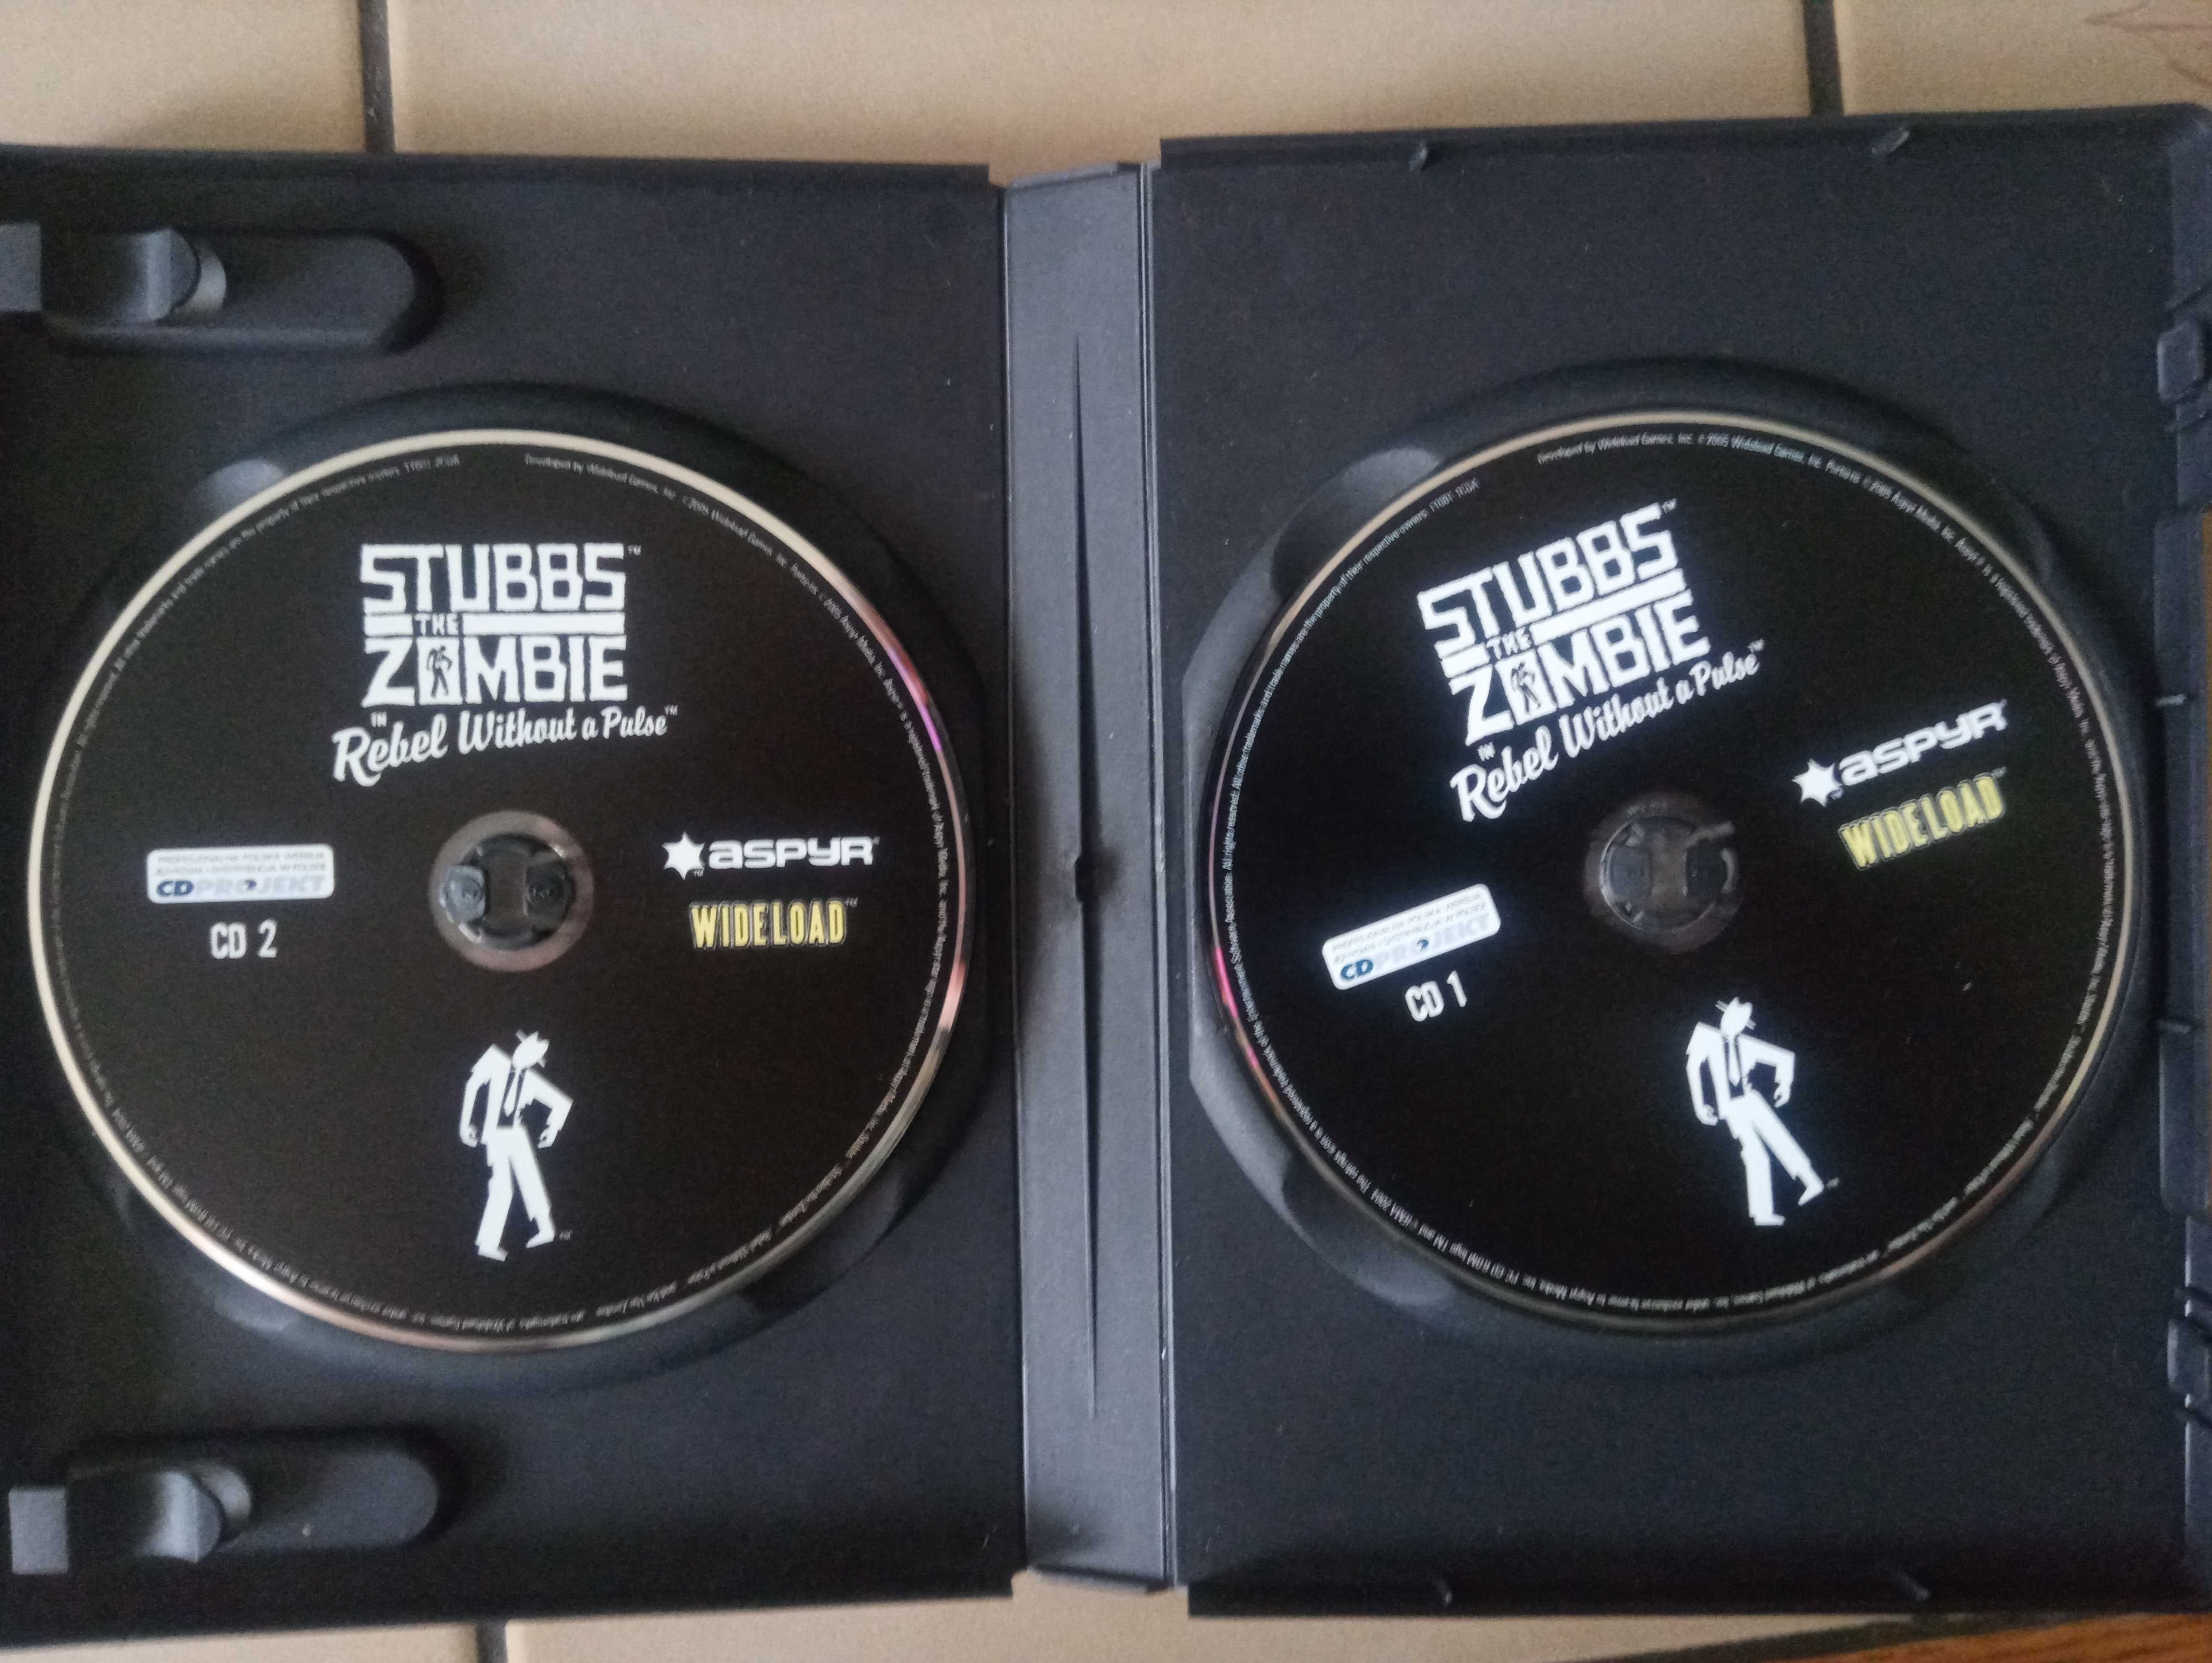 Stubbs The Zombie In Rebel Without A Pulse PC BOX PL